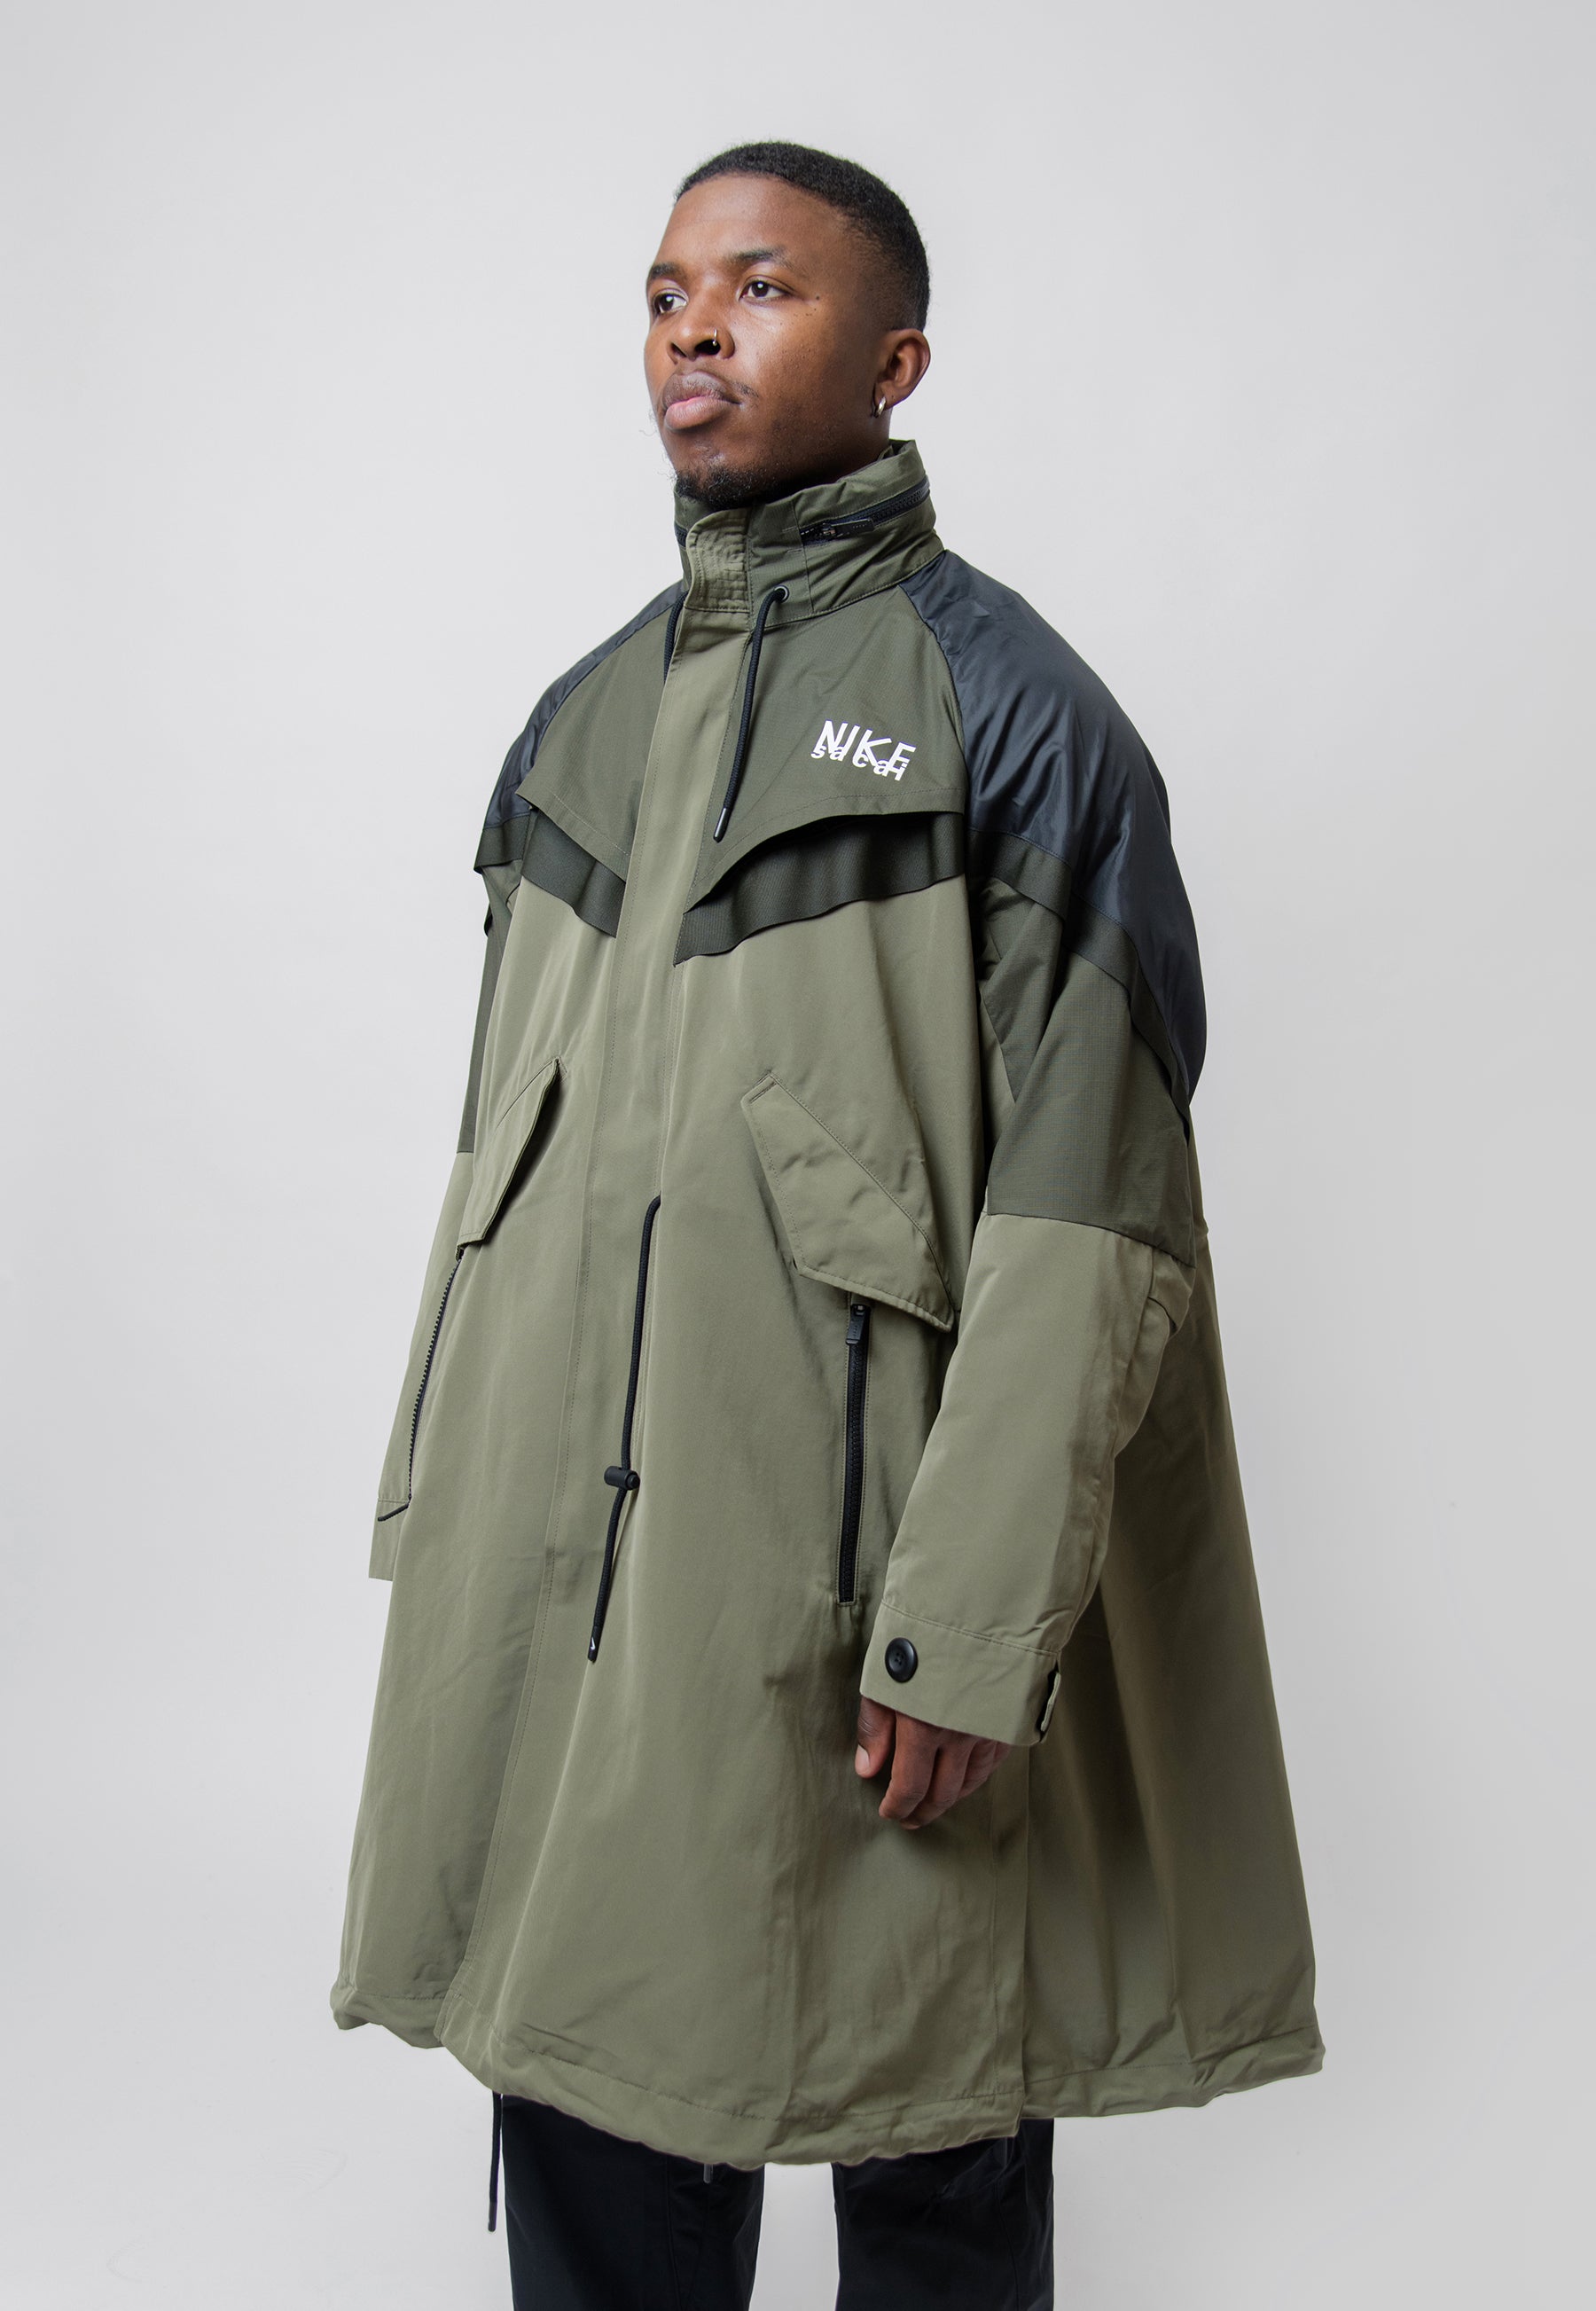 Sacai SG Trench Jacket Medium Olive DQ LAUNCH PRODUCT